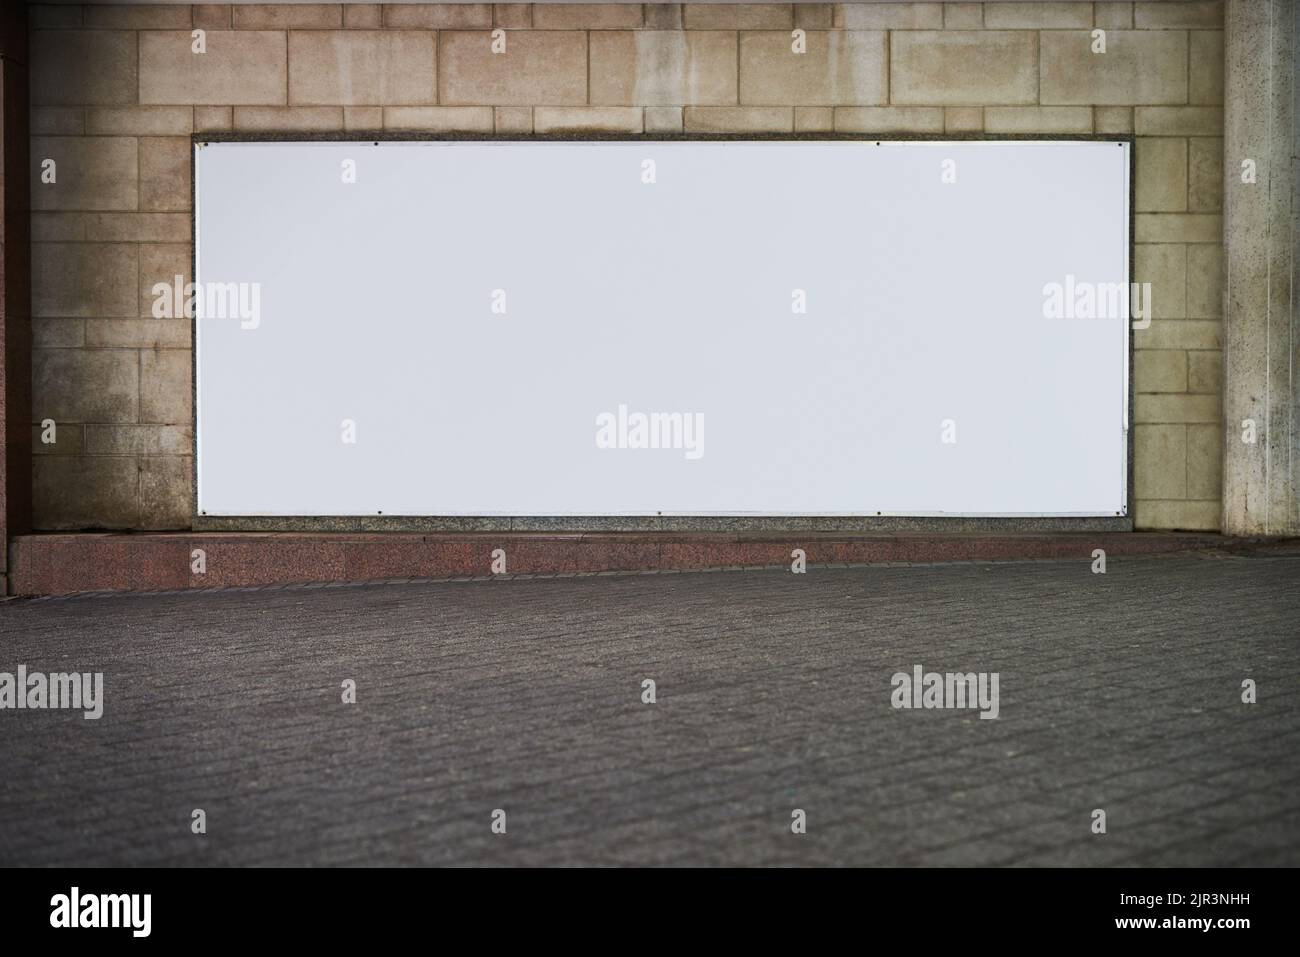 Want more businessAdvertise here. a large blank billboard with space to add your own text. Stock Photo